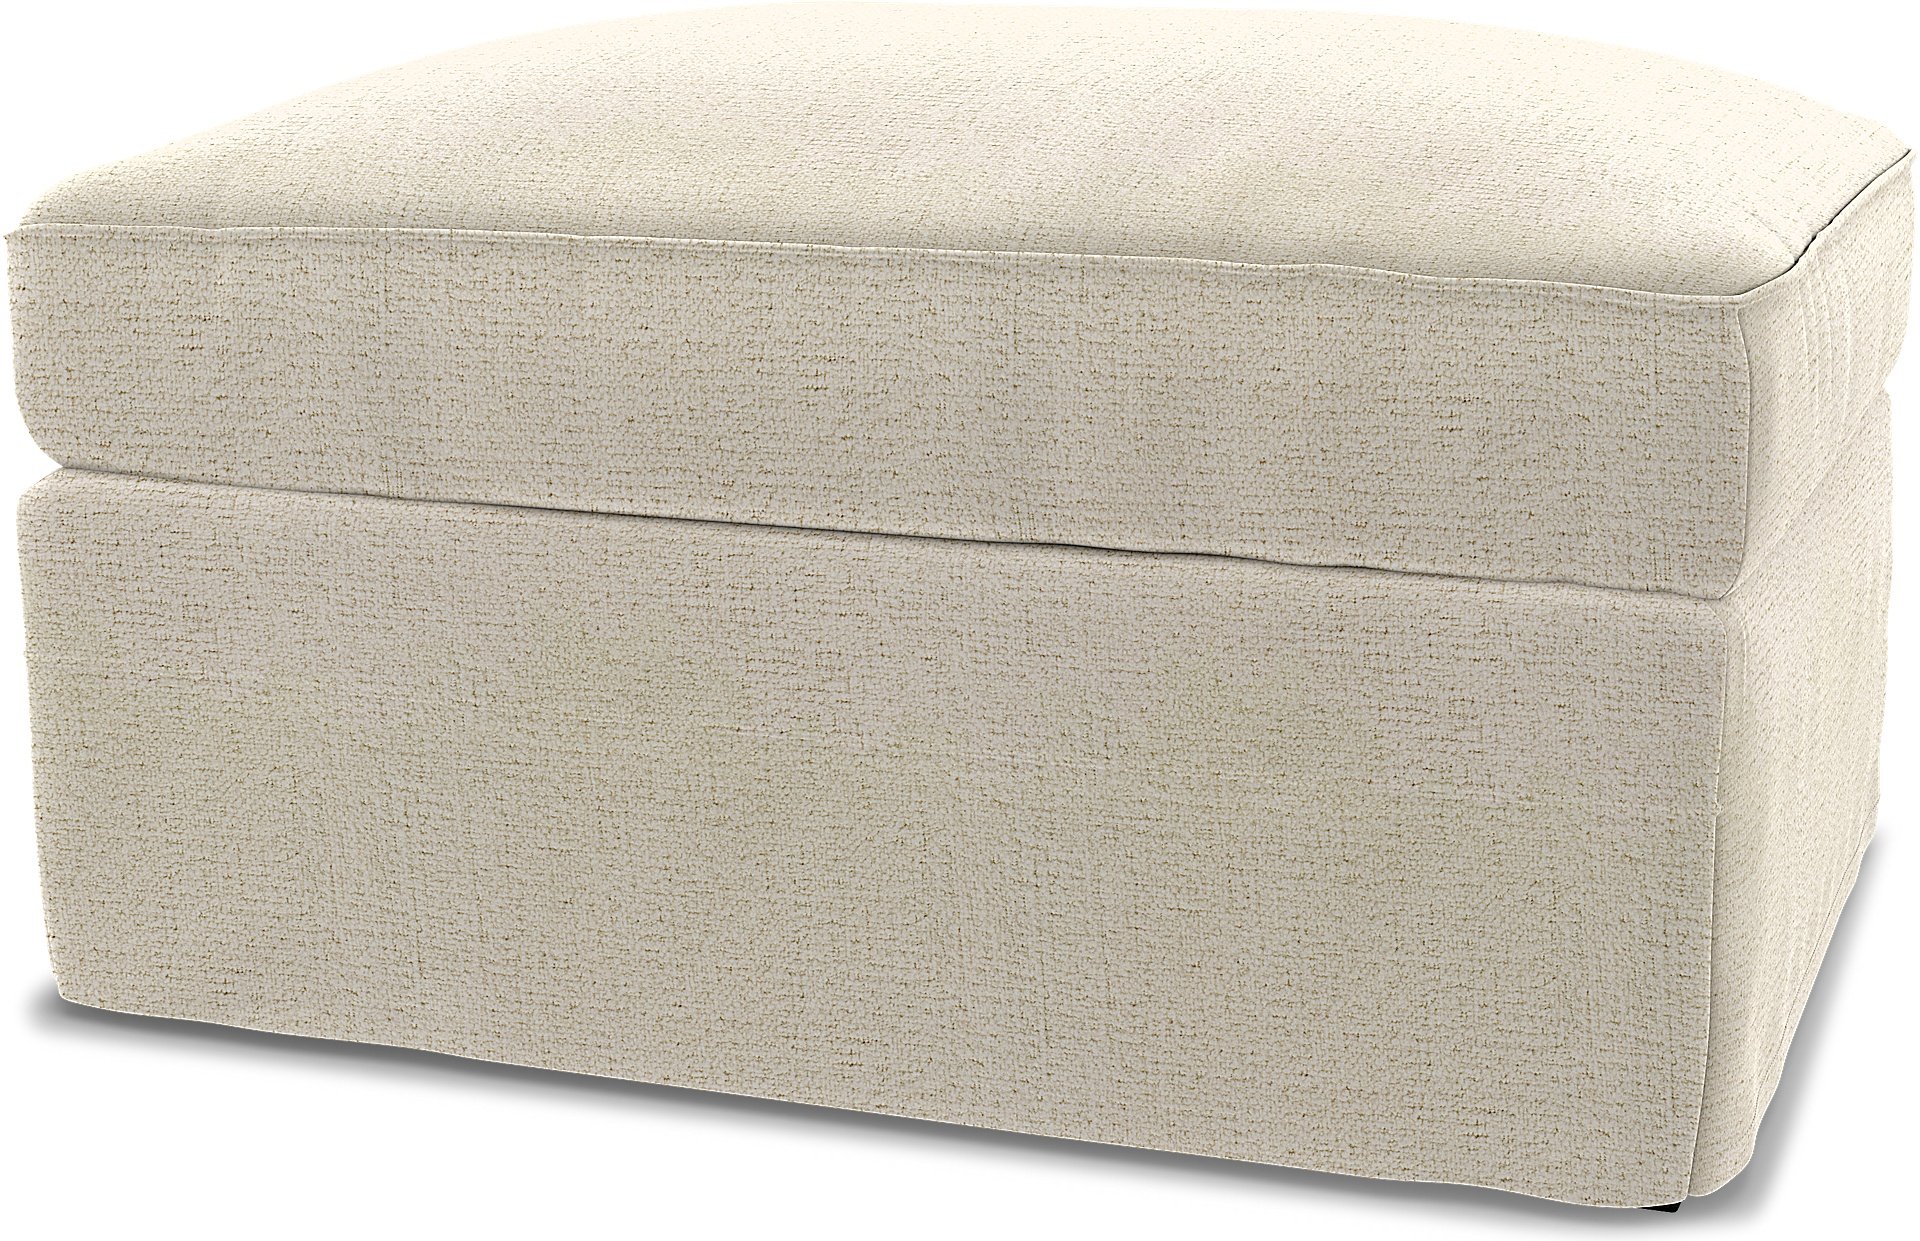 IKEA - Gronlid Footstool with Storage Cover, Ecru, Boucle & Texture - Bemz